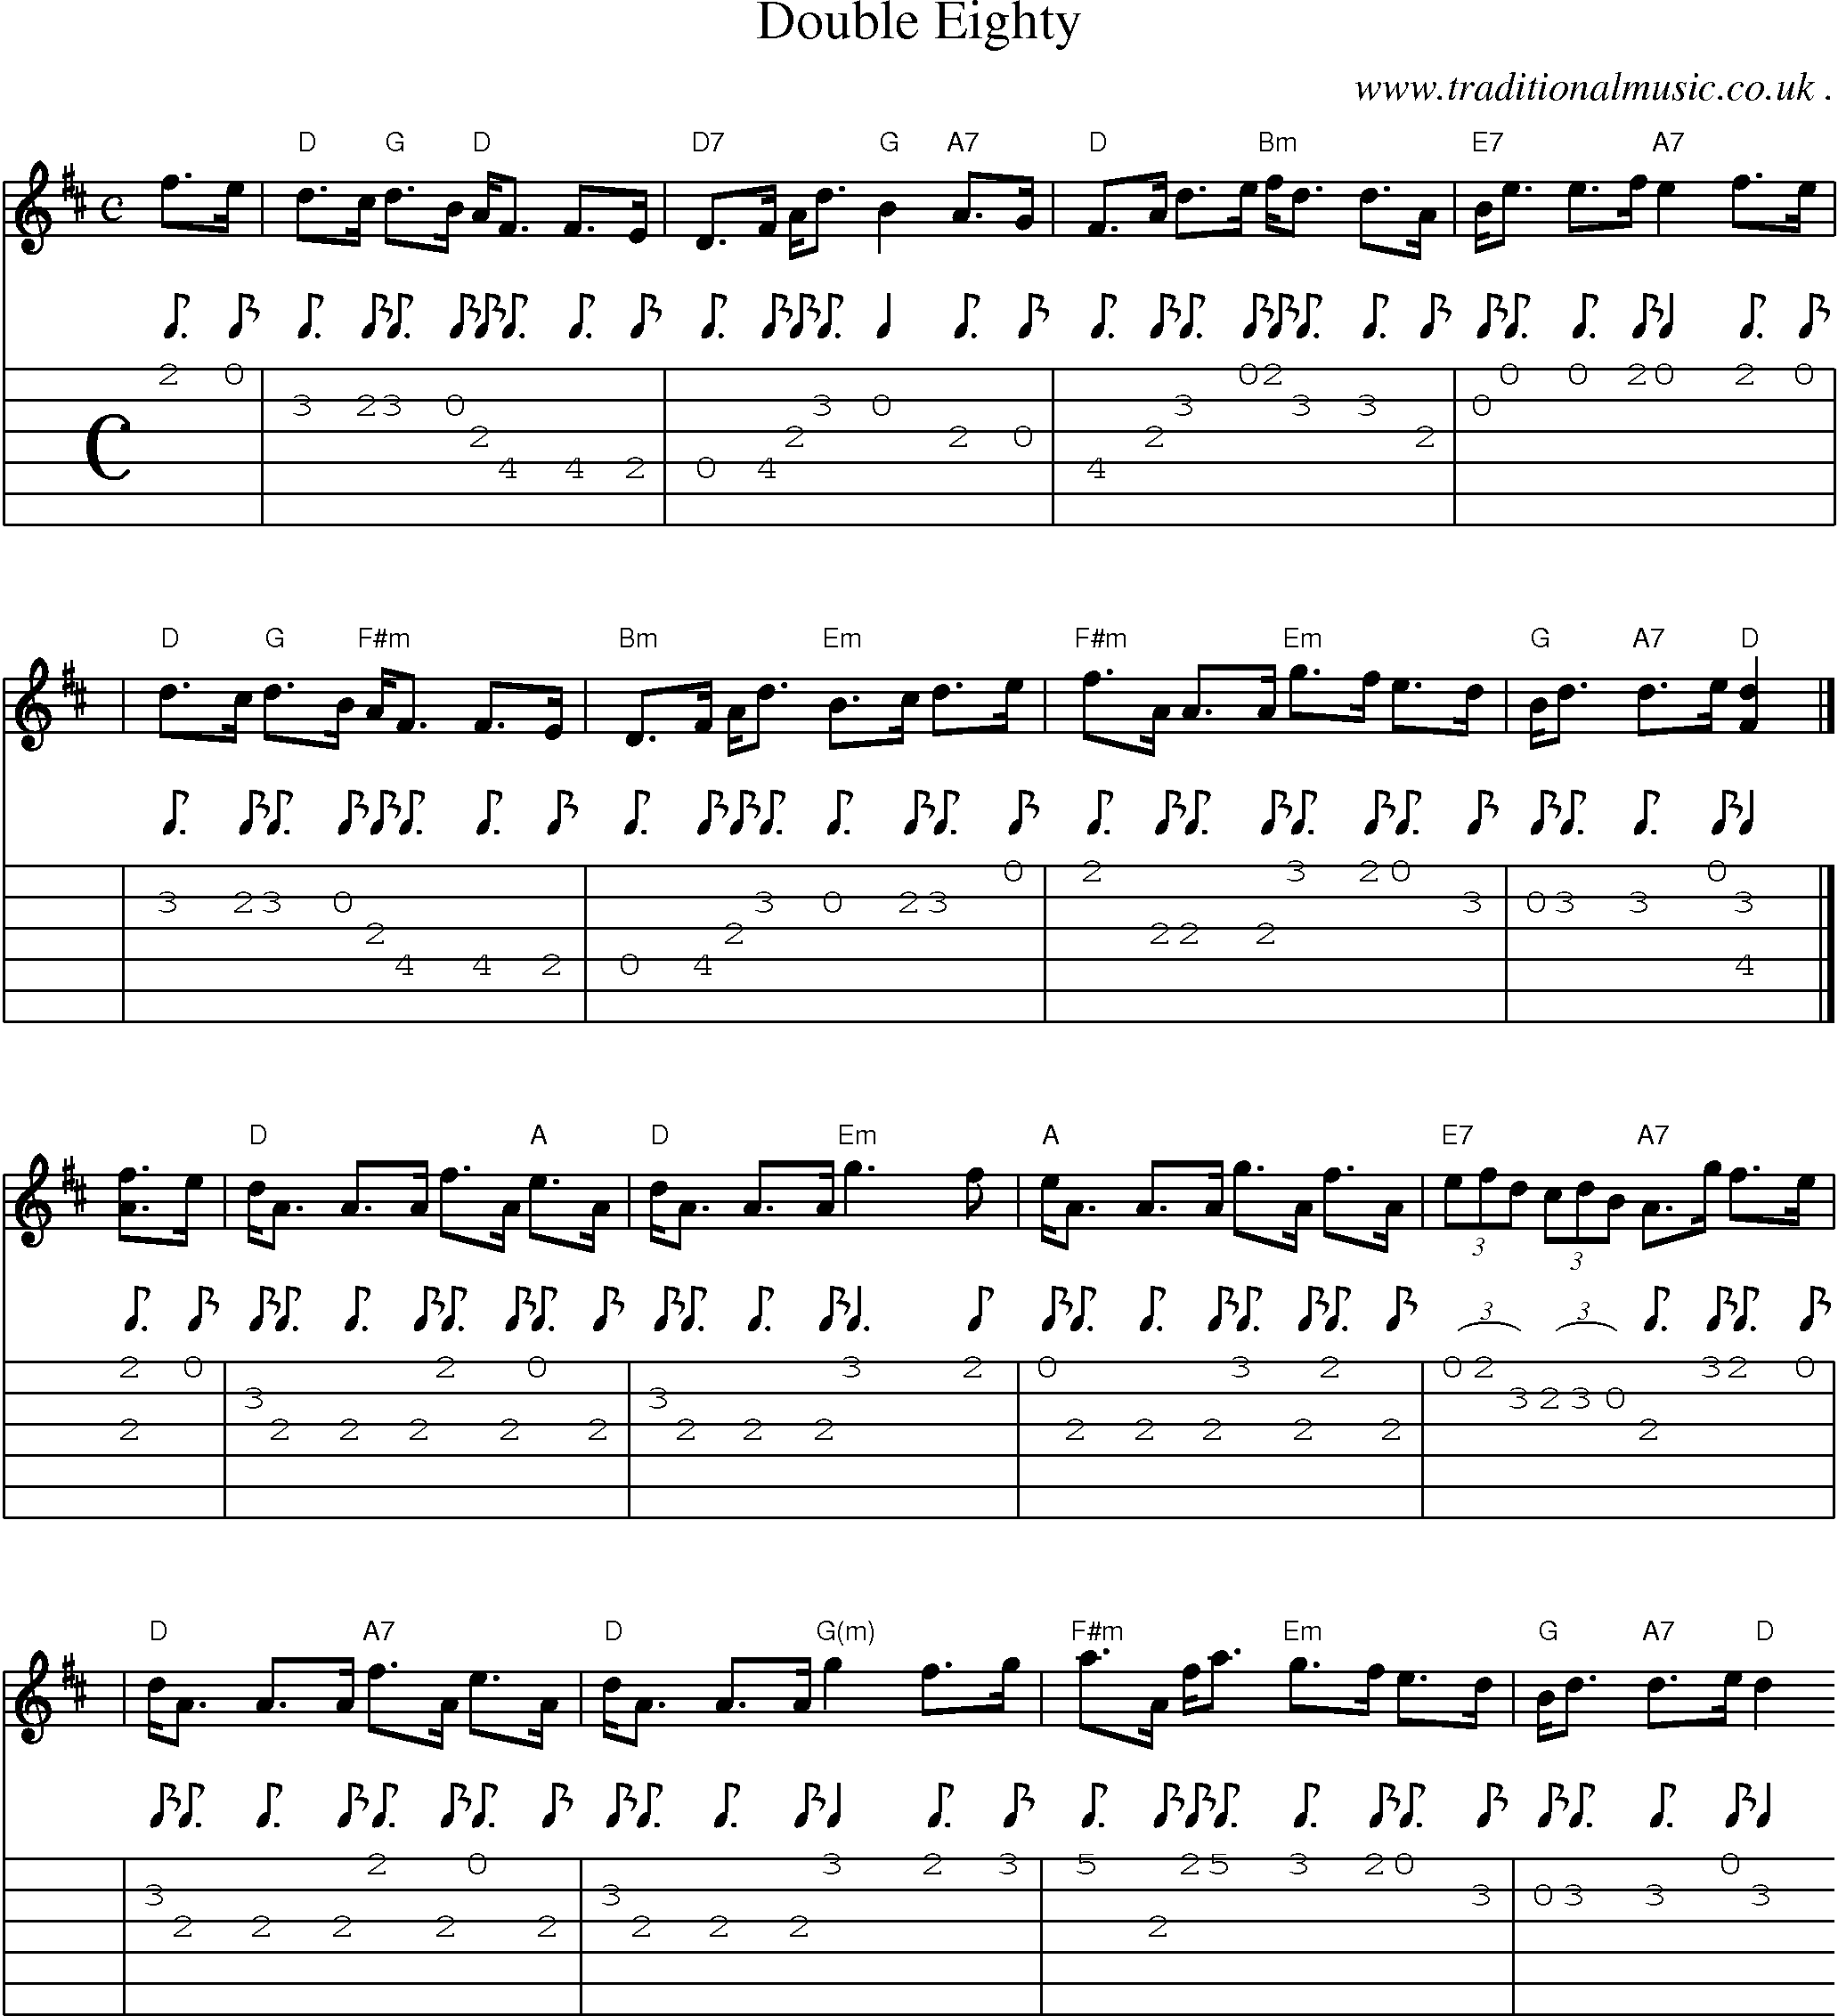 Sheet-music  score, Chords and Guitar Tabs for Double Eighty